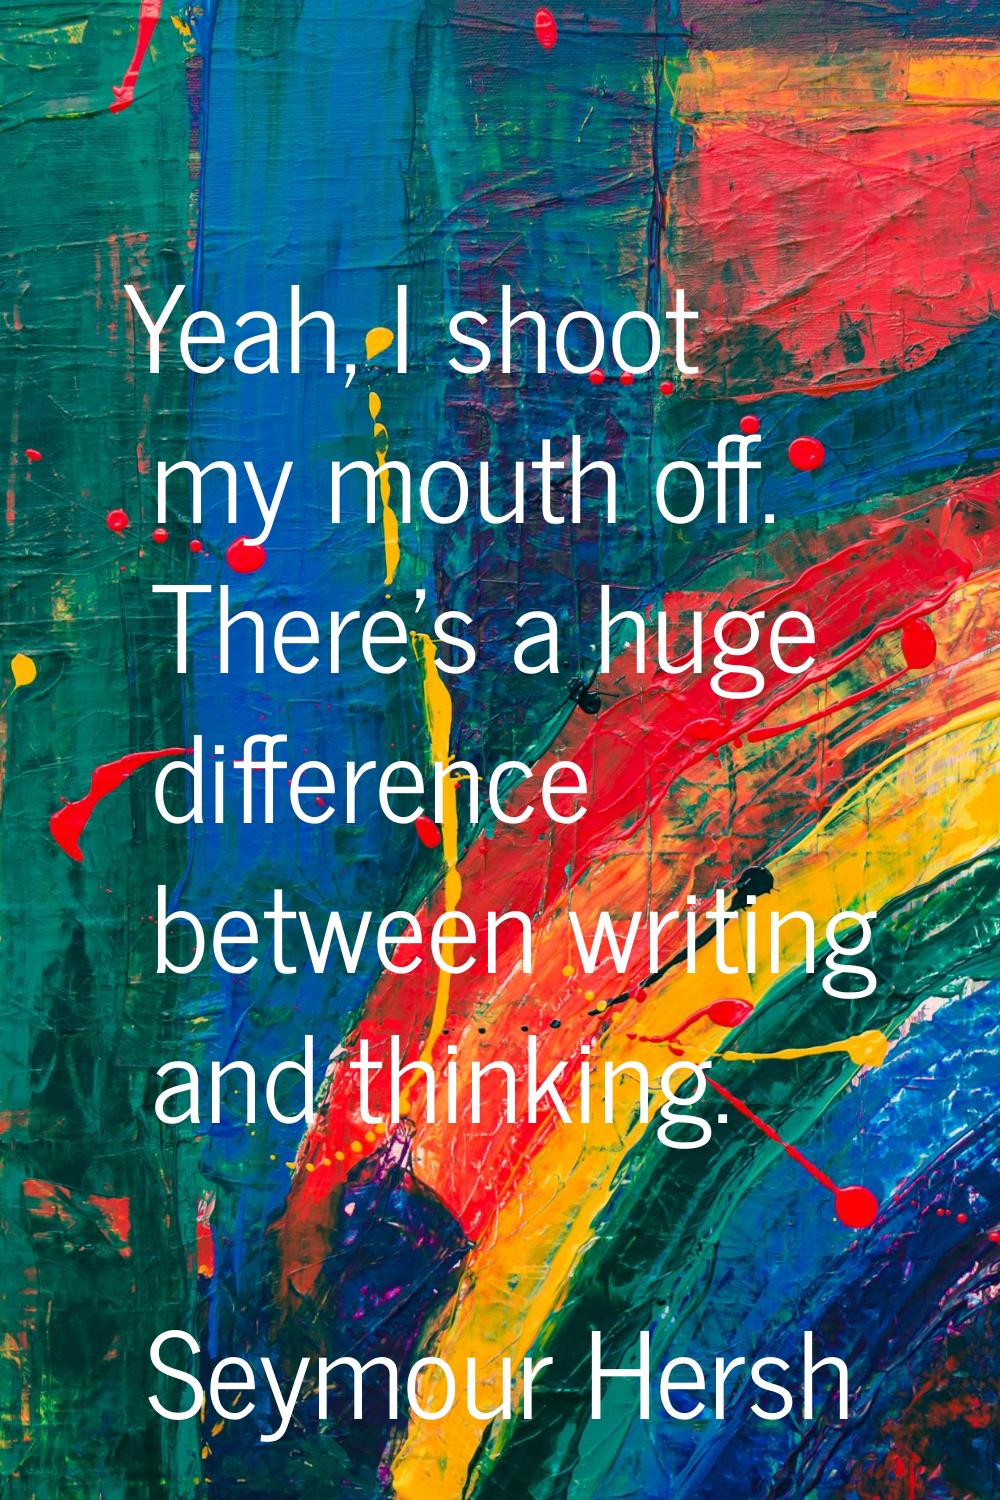 Yeah, I shoot my mouth off. There's a huge difference between writing and thinking.